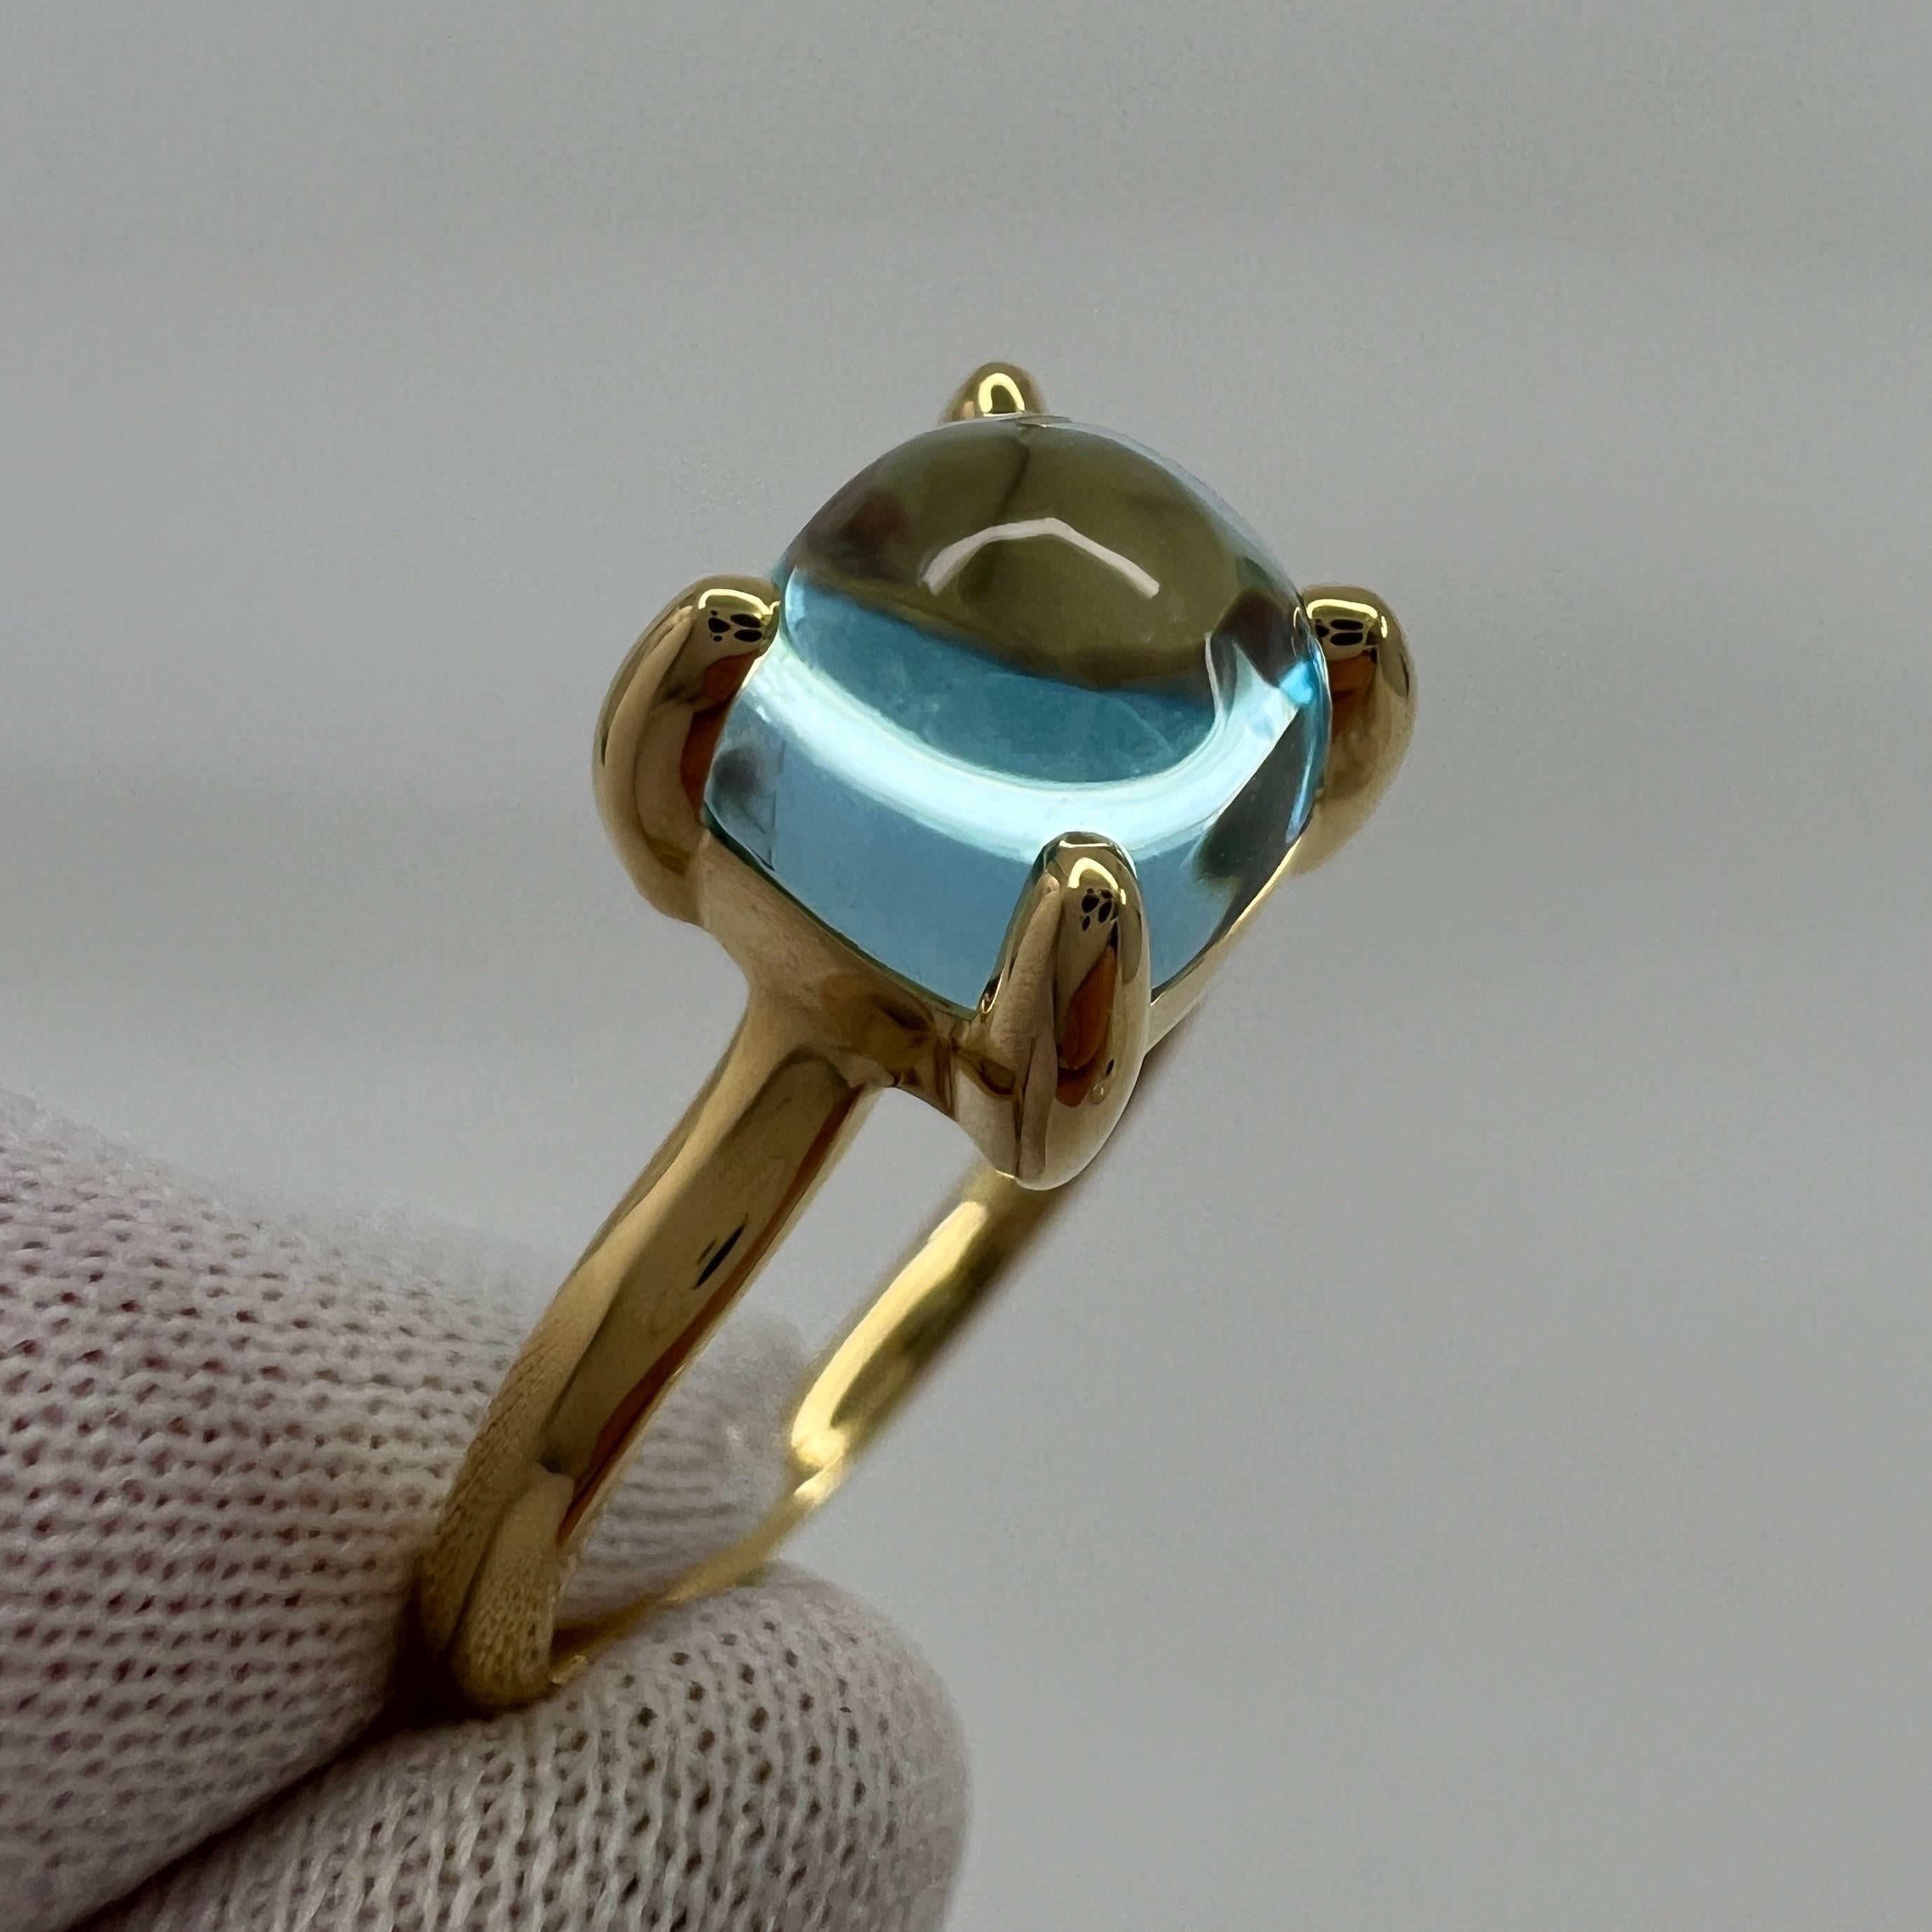 Rare Vintage Tiffany & Co. Paloma Picasso Blue Topaz Sugar Stack 18k Yellow Gold Ring.

A beautiful and rare sugarloaf blue topaz ring from the Tiffany & Co Paloma Picasso collection.

Fine jewellery houses like Tiffany only use the finest gemstone